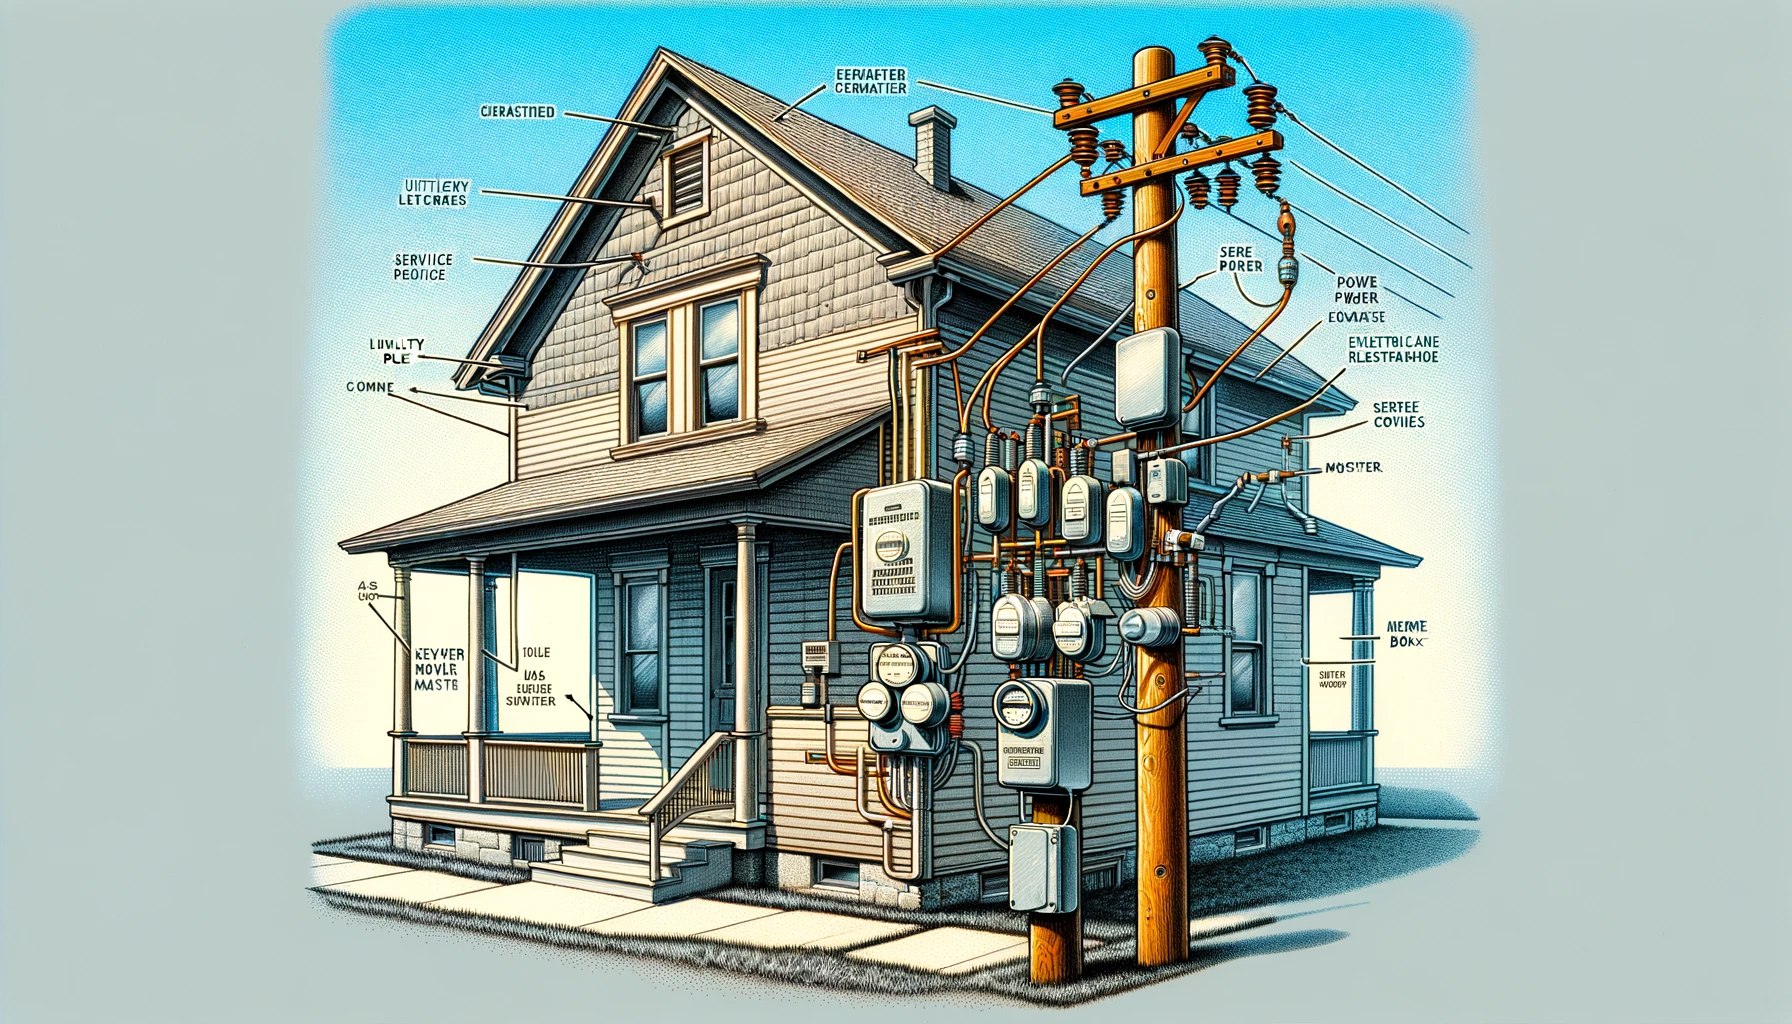 Point of attachment for Electrical Service